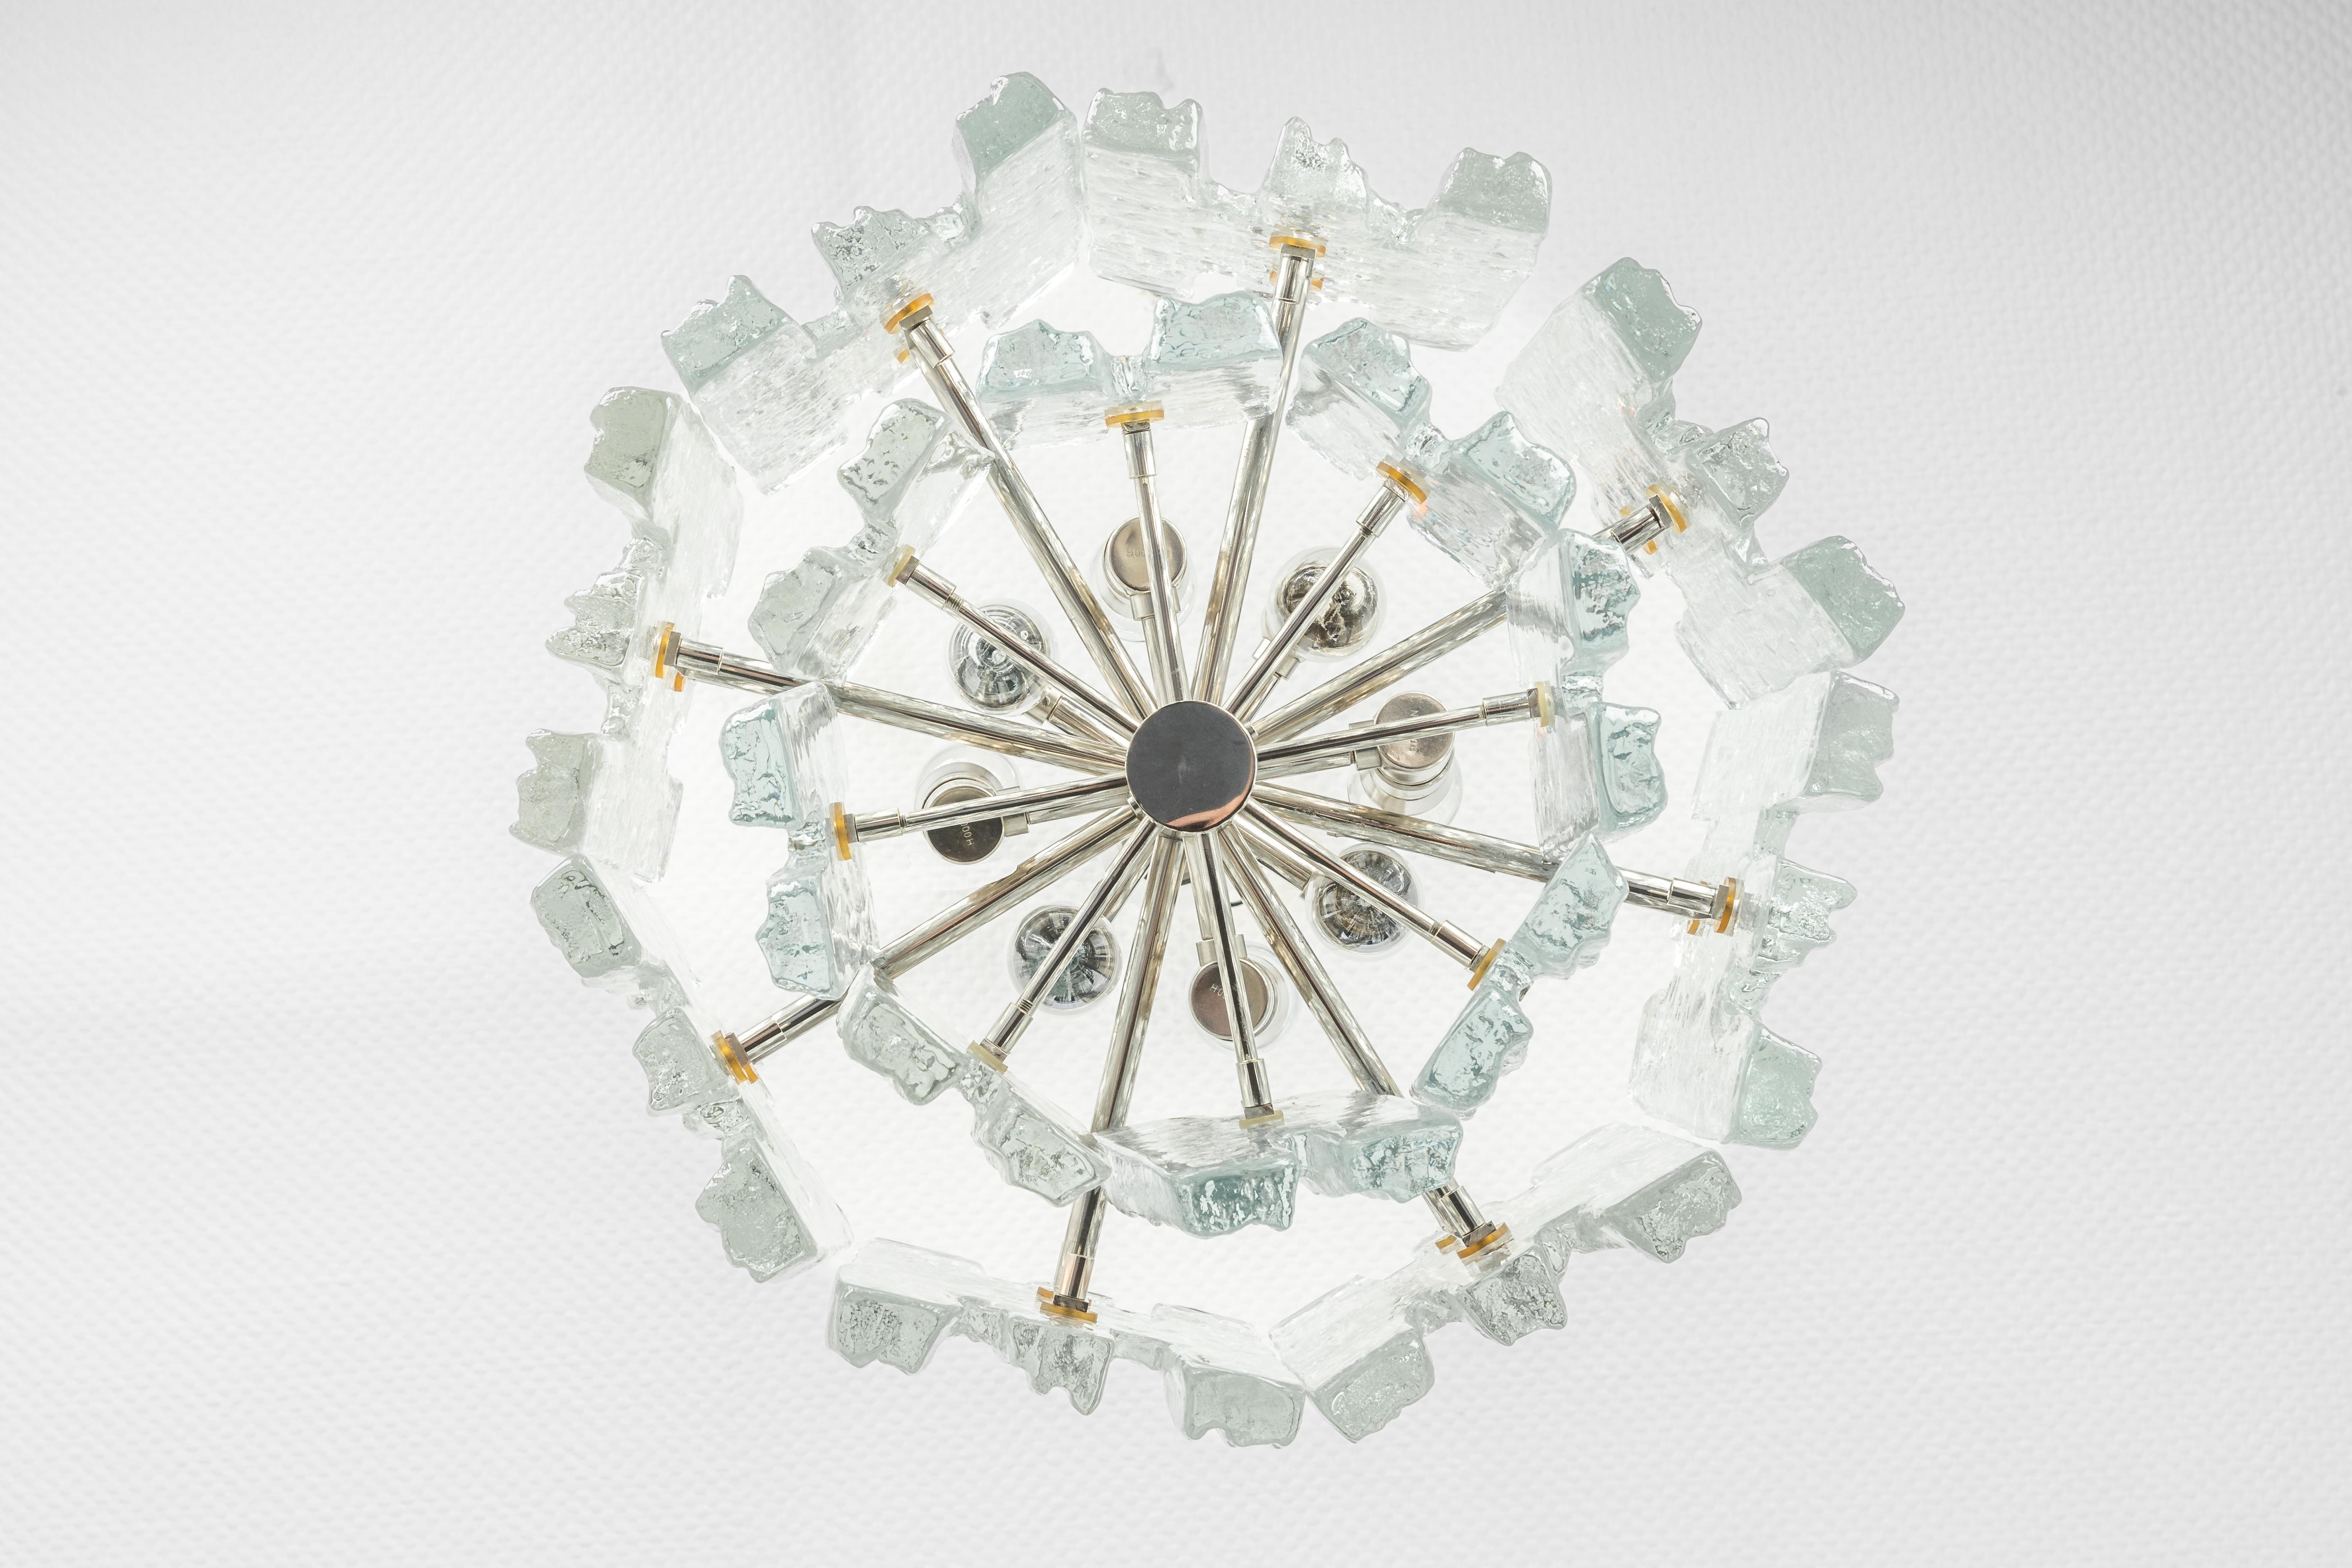 1 of 2 Stunning Murano glass chandelier by Kalmar, 1960s
Two tiers gather structured glasses, beautifully refracting the light very heavy quality.

High quality and in very good condition. Cleaned, well-wired, and ready to use. 

The fixture